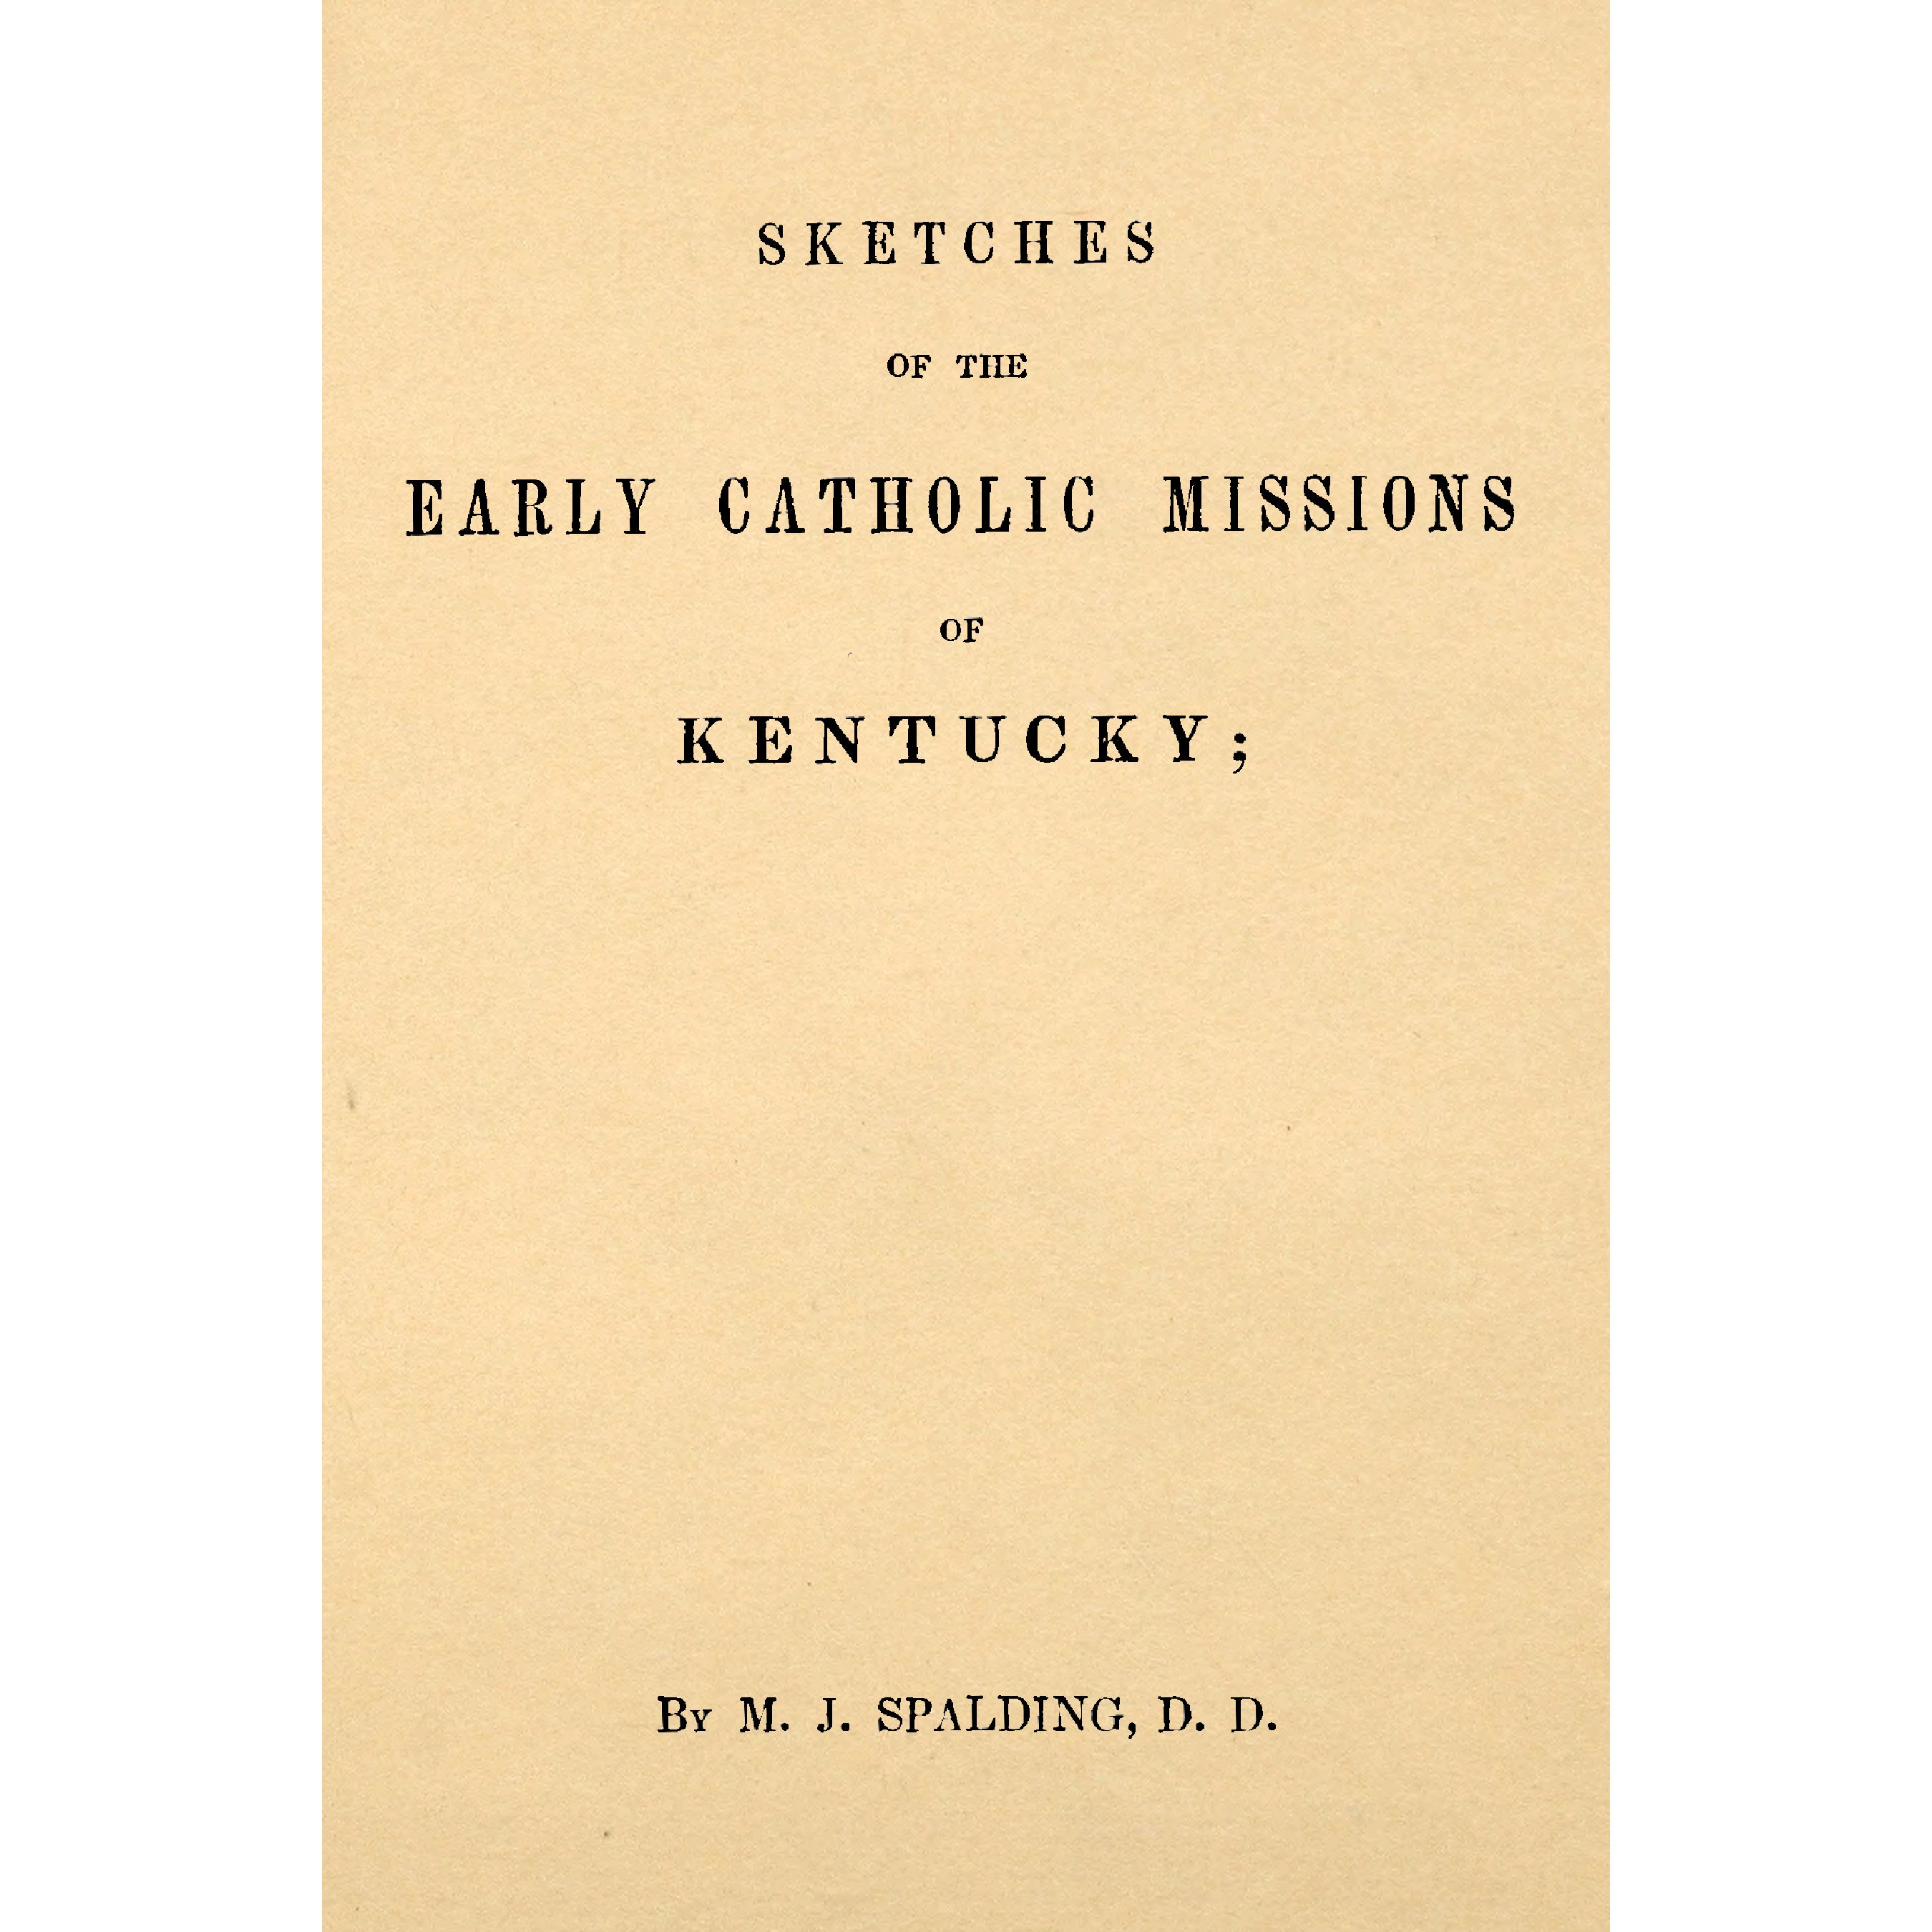 Sketches of the Early Catholic Missions of Kentucky; From their Commencement in 1787 to the Jubileee of 1826-27